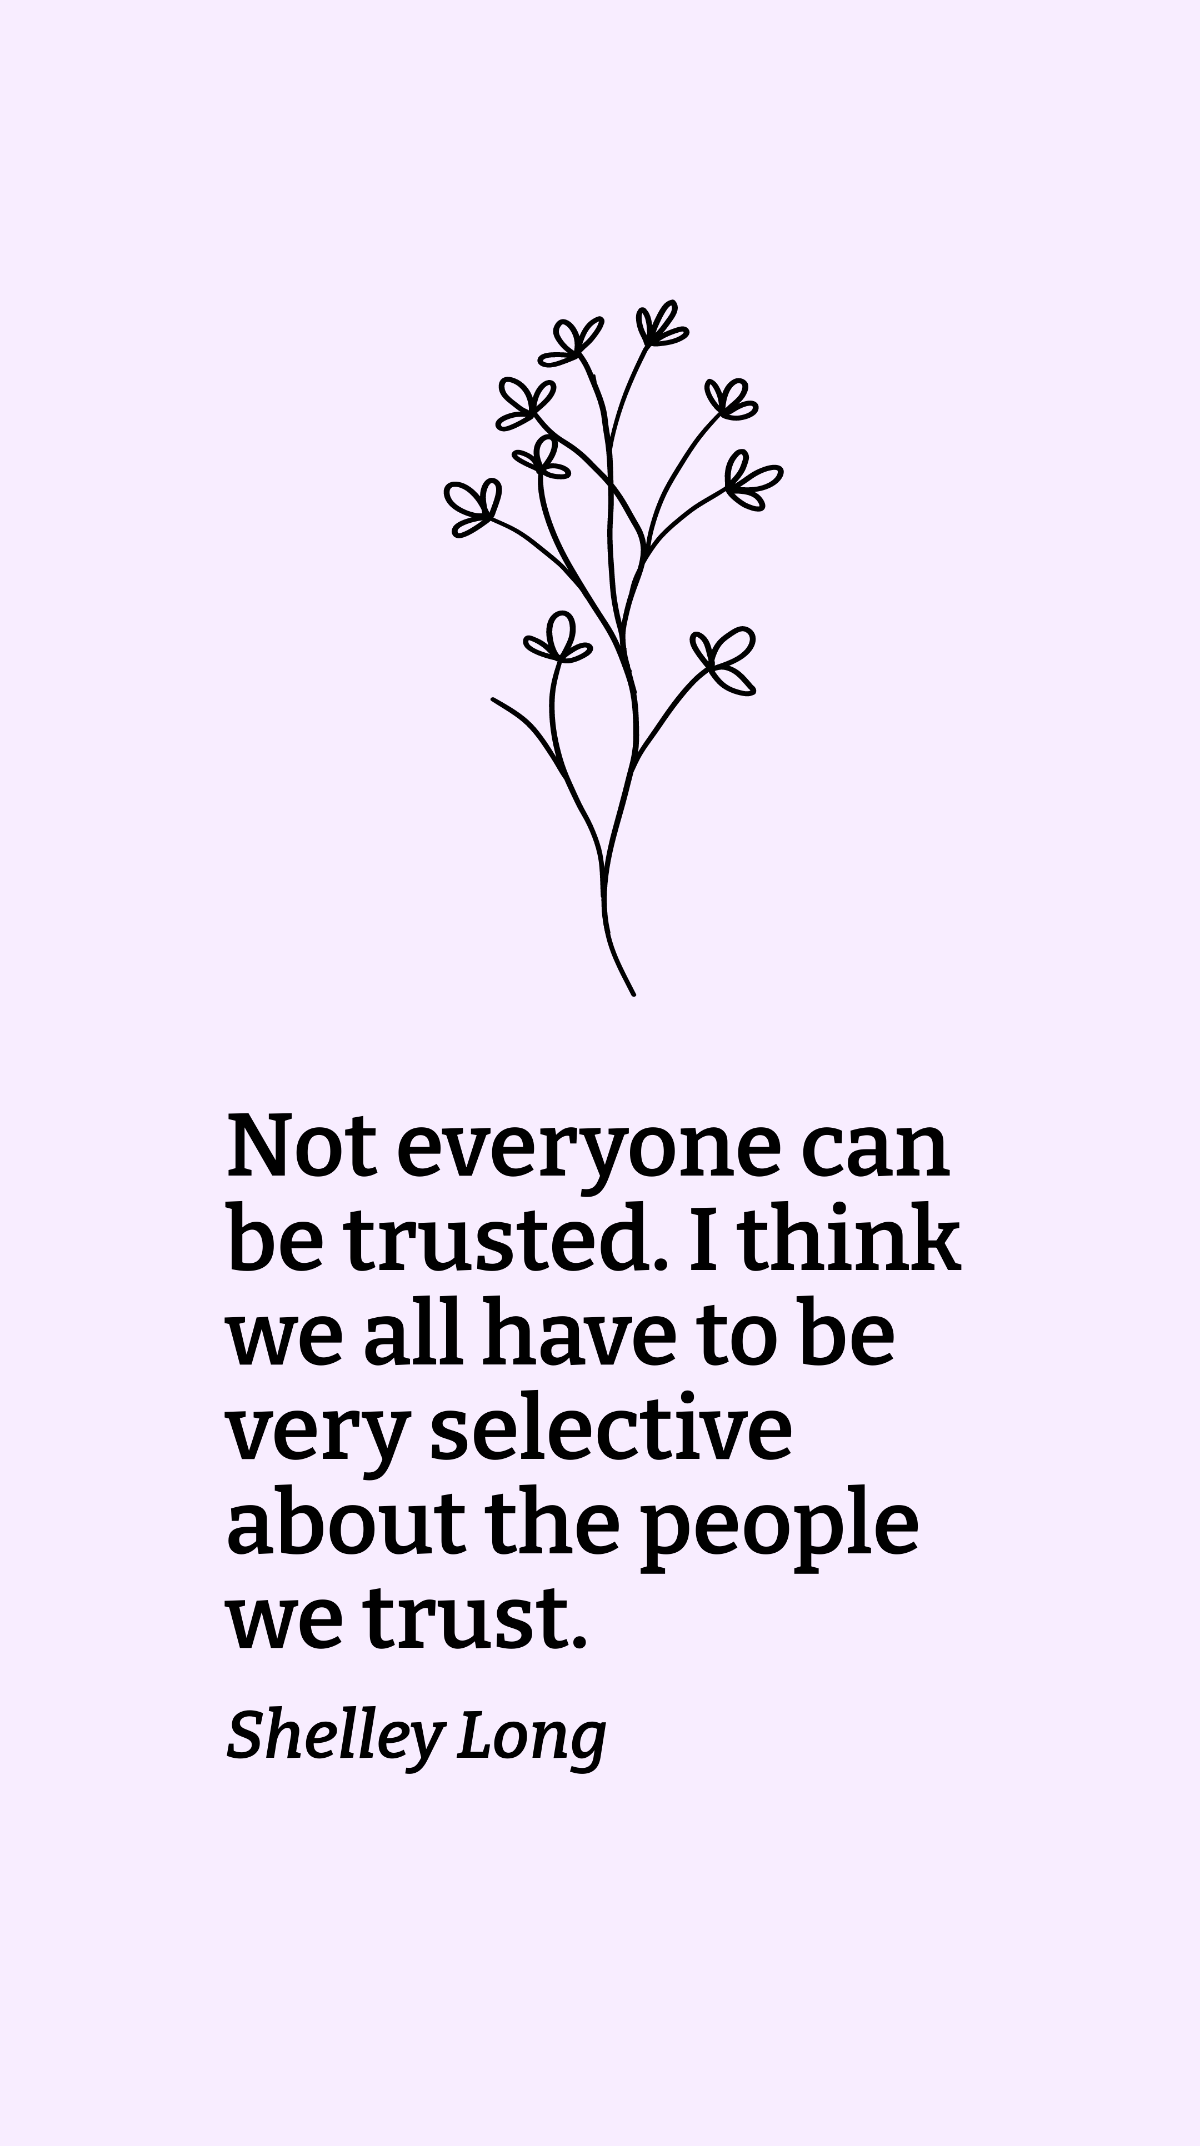 Shelley Long - Not everyone can be trusted. I think we all have to be very selective about the people we trust. Template